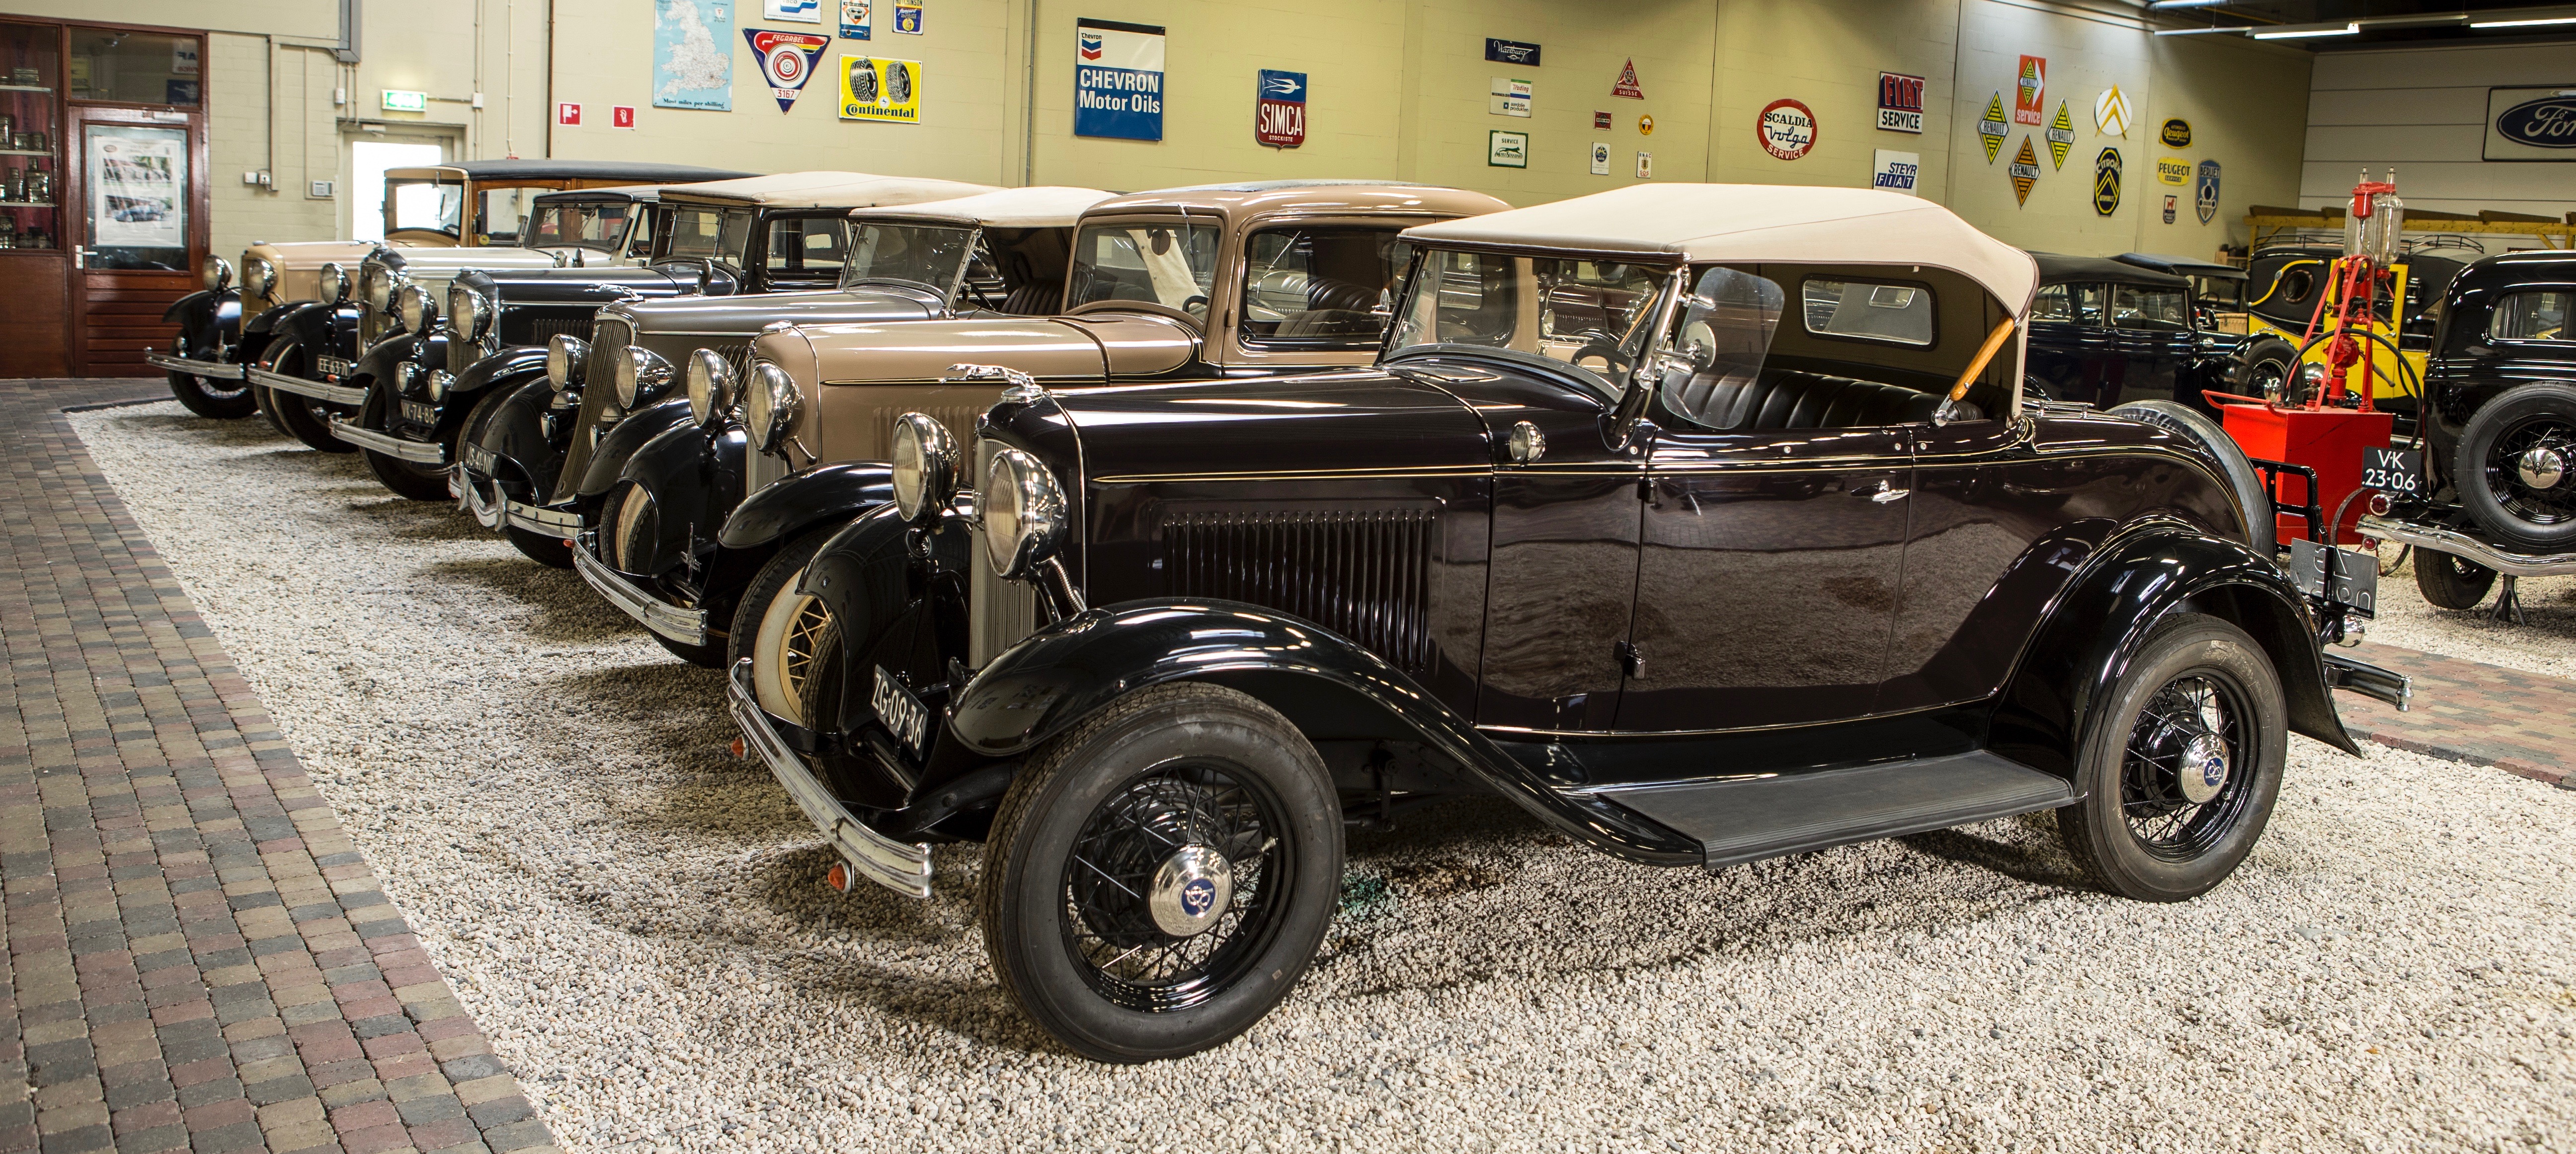 European Ford museum, European Ford museum collection going to auction, ClassicCars.com Journal